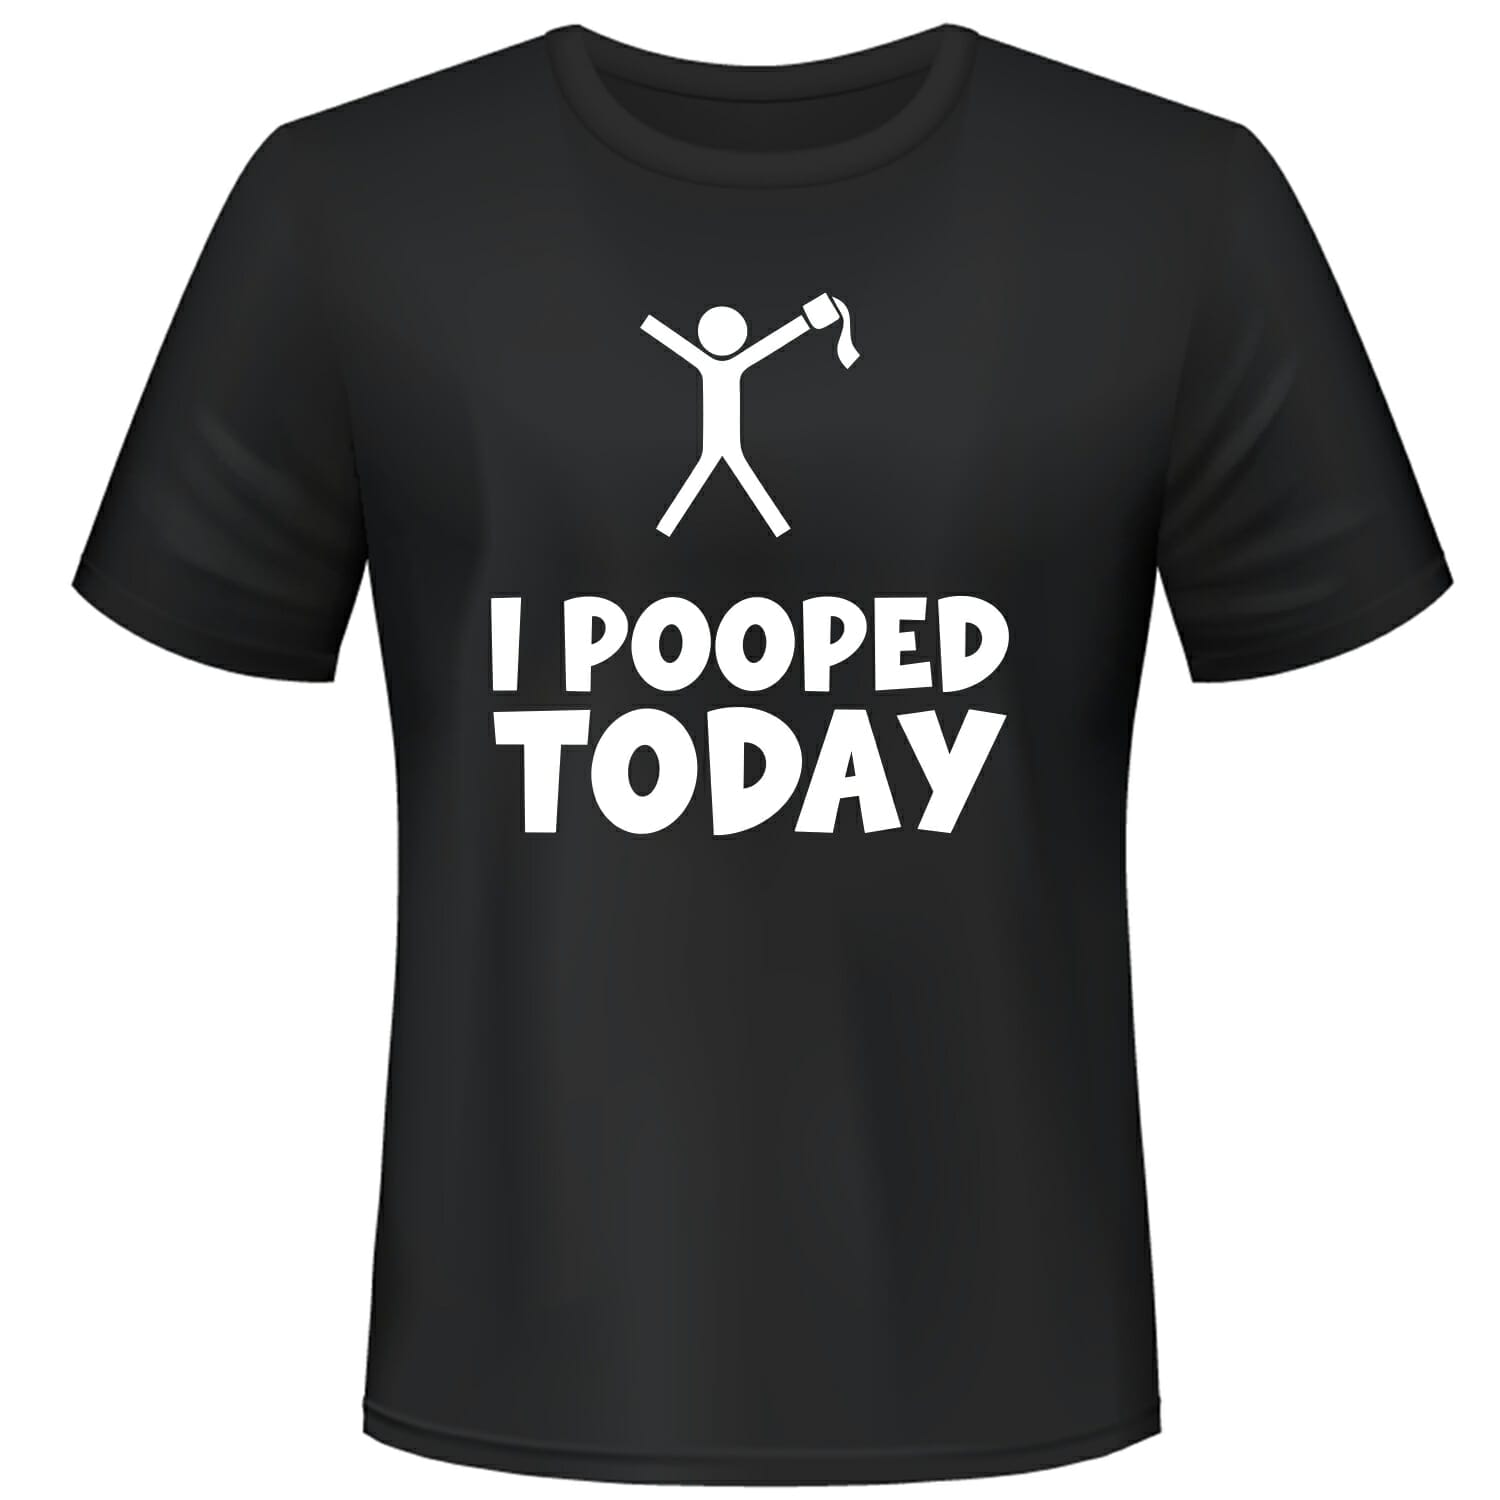 I-pooped-today-funny-tshirt-design